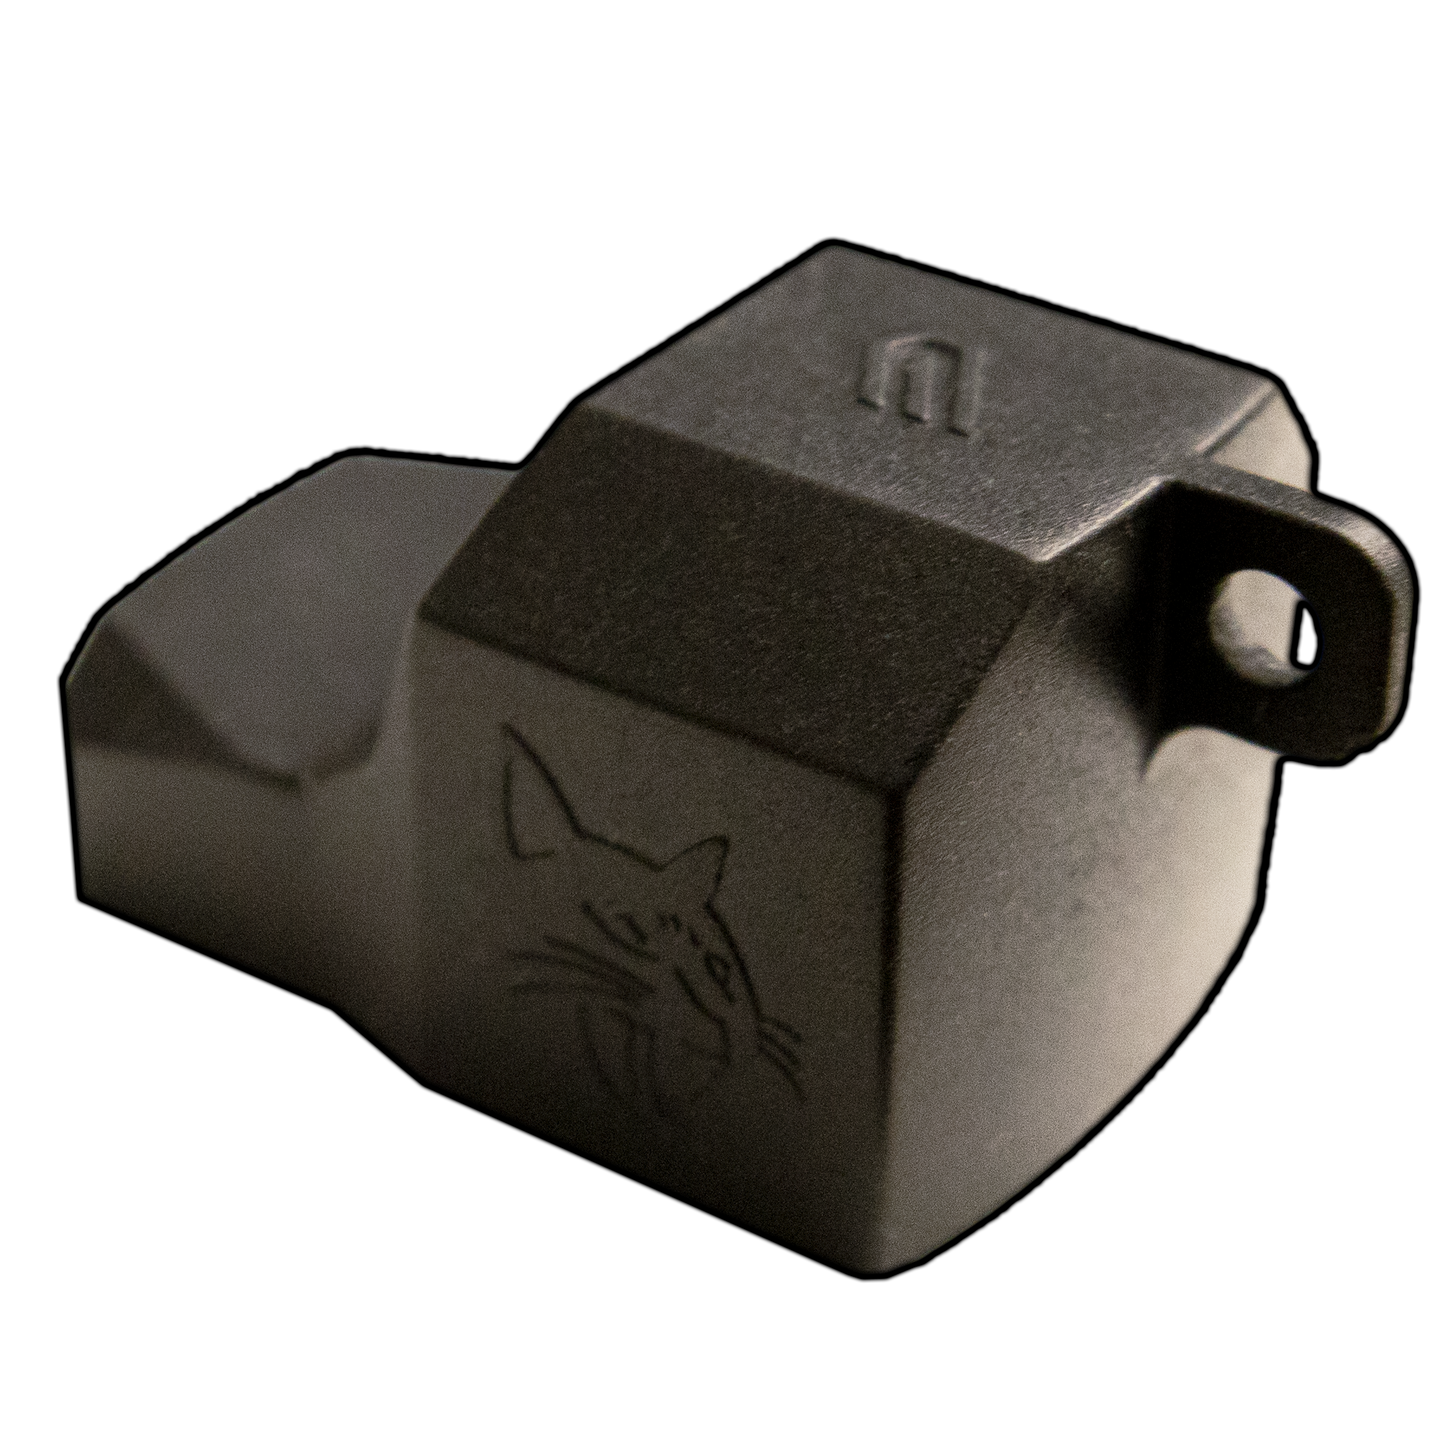 a close up of a metal object with a cat drawn on it